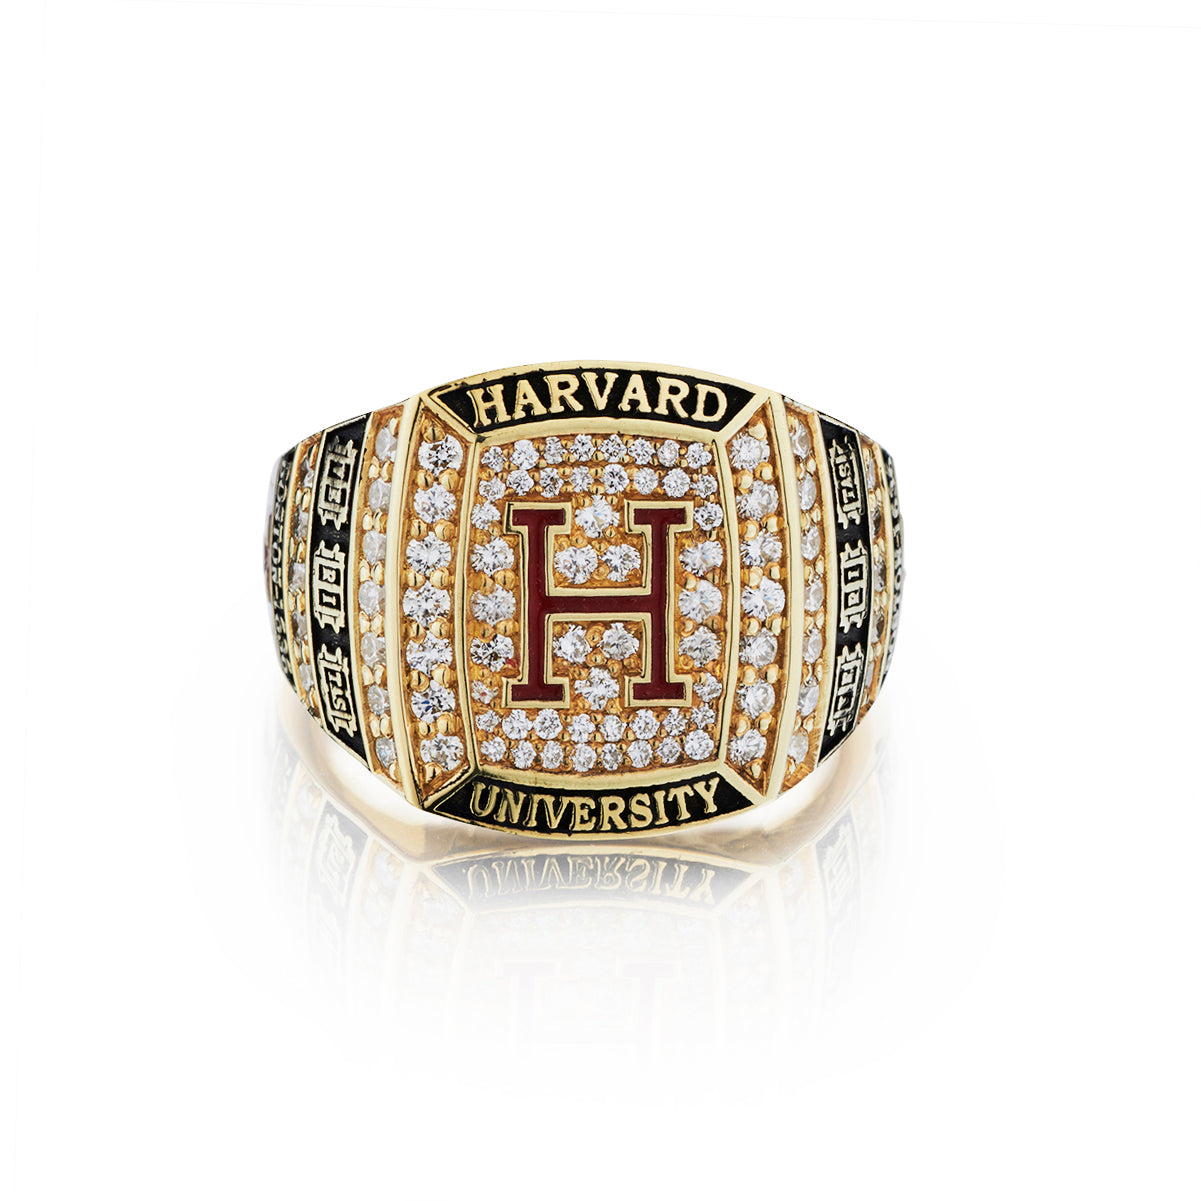 Front view of the Harvard Limited Edition Veritas Class Ring, highlighting its iconic Harvard "H" emblem and the intricate details of the ring's design.